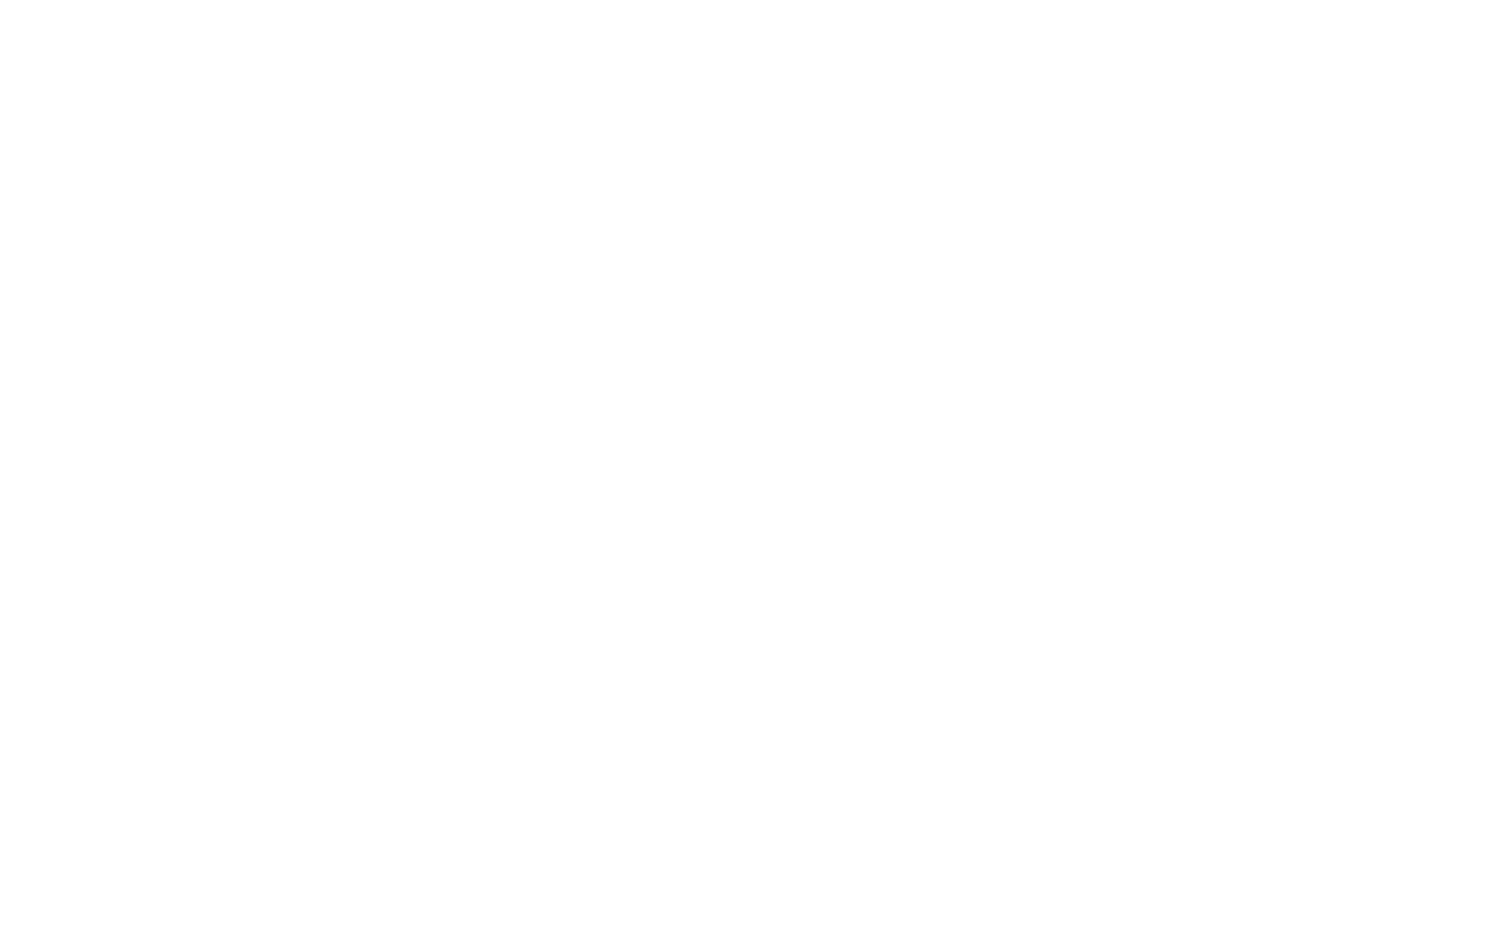 Axewood Axe Throwing Events Co.